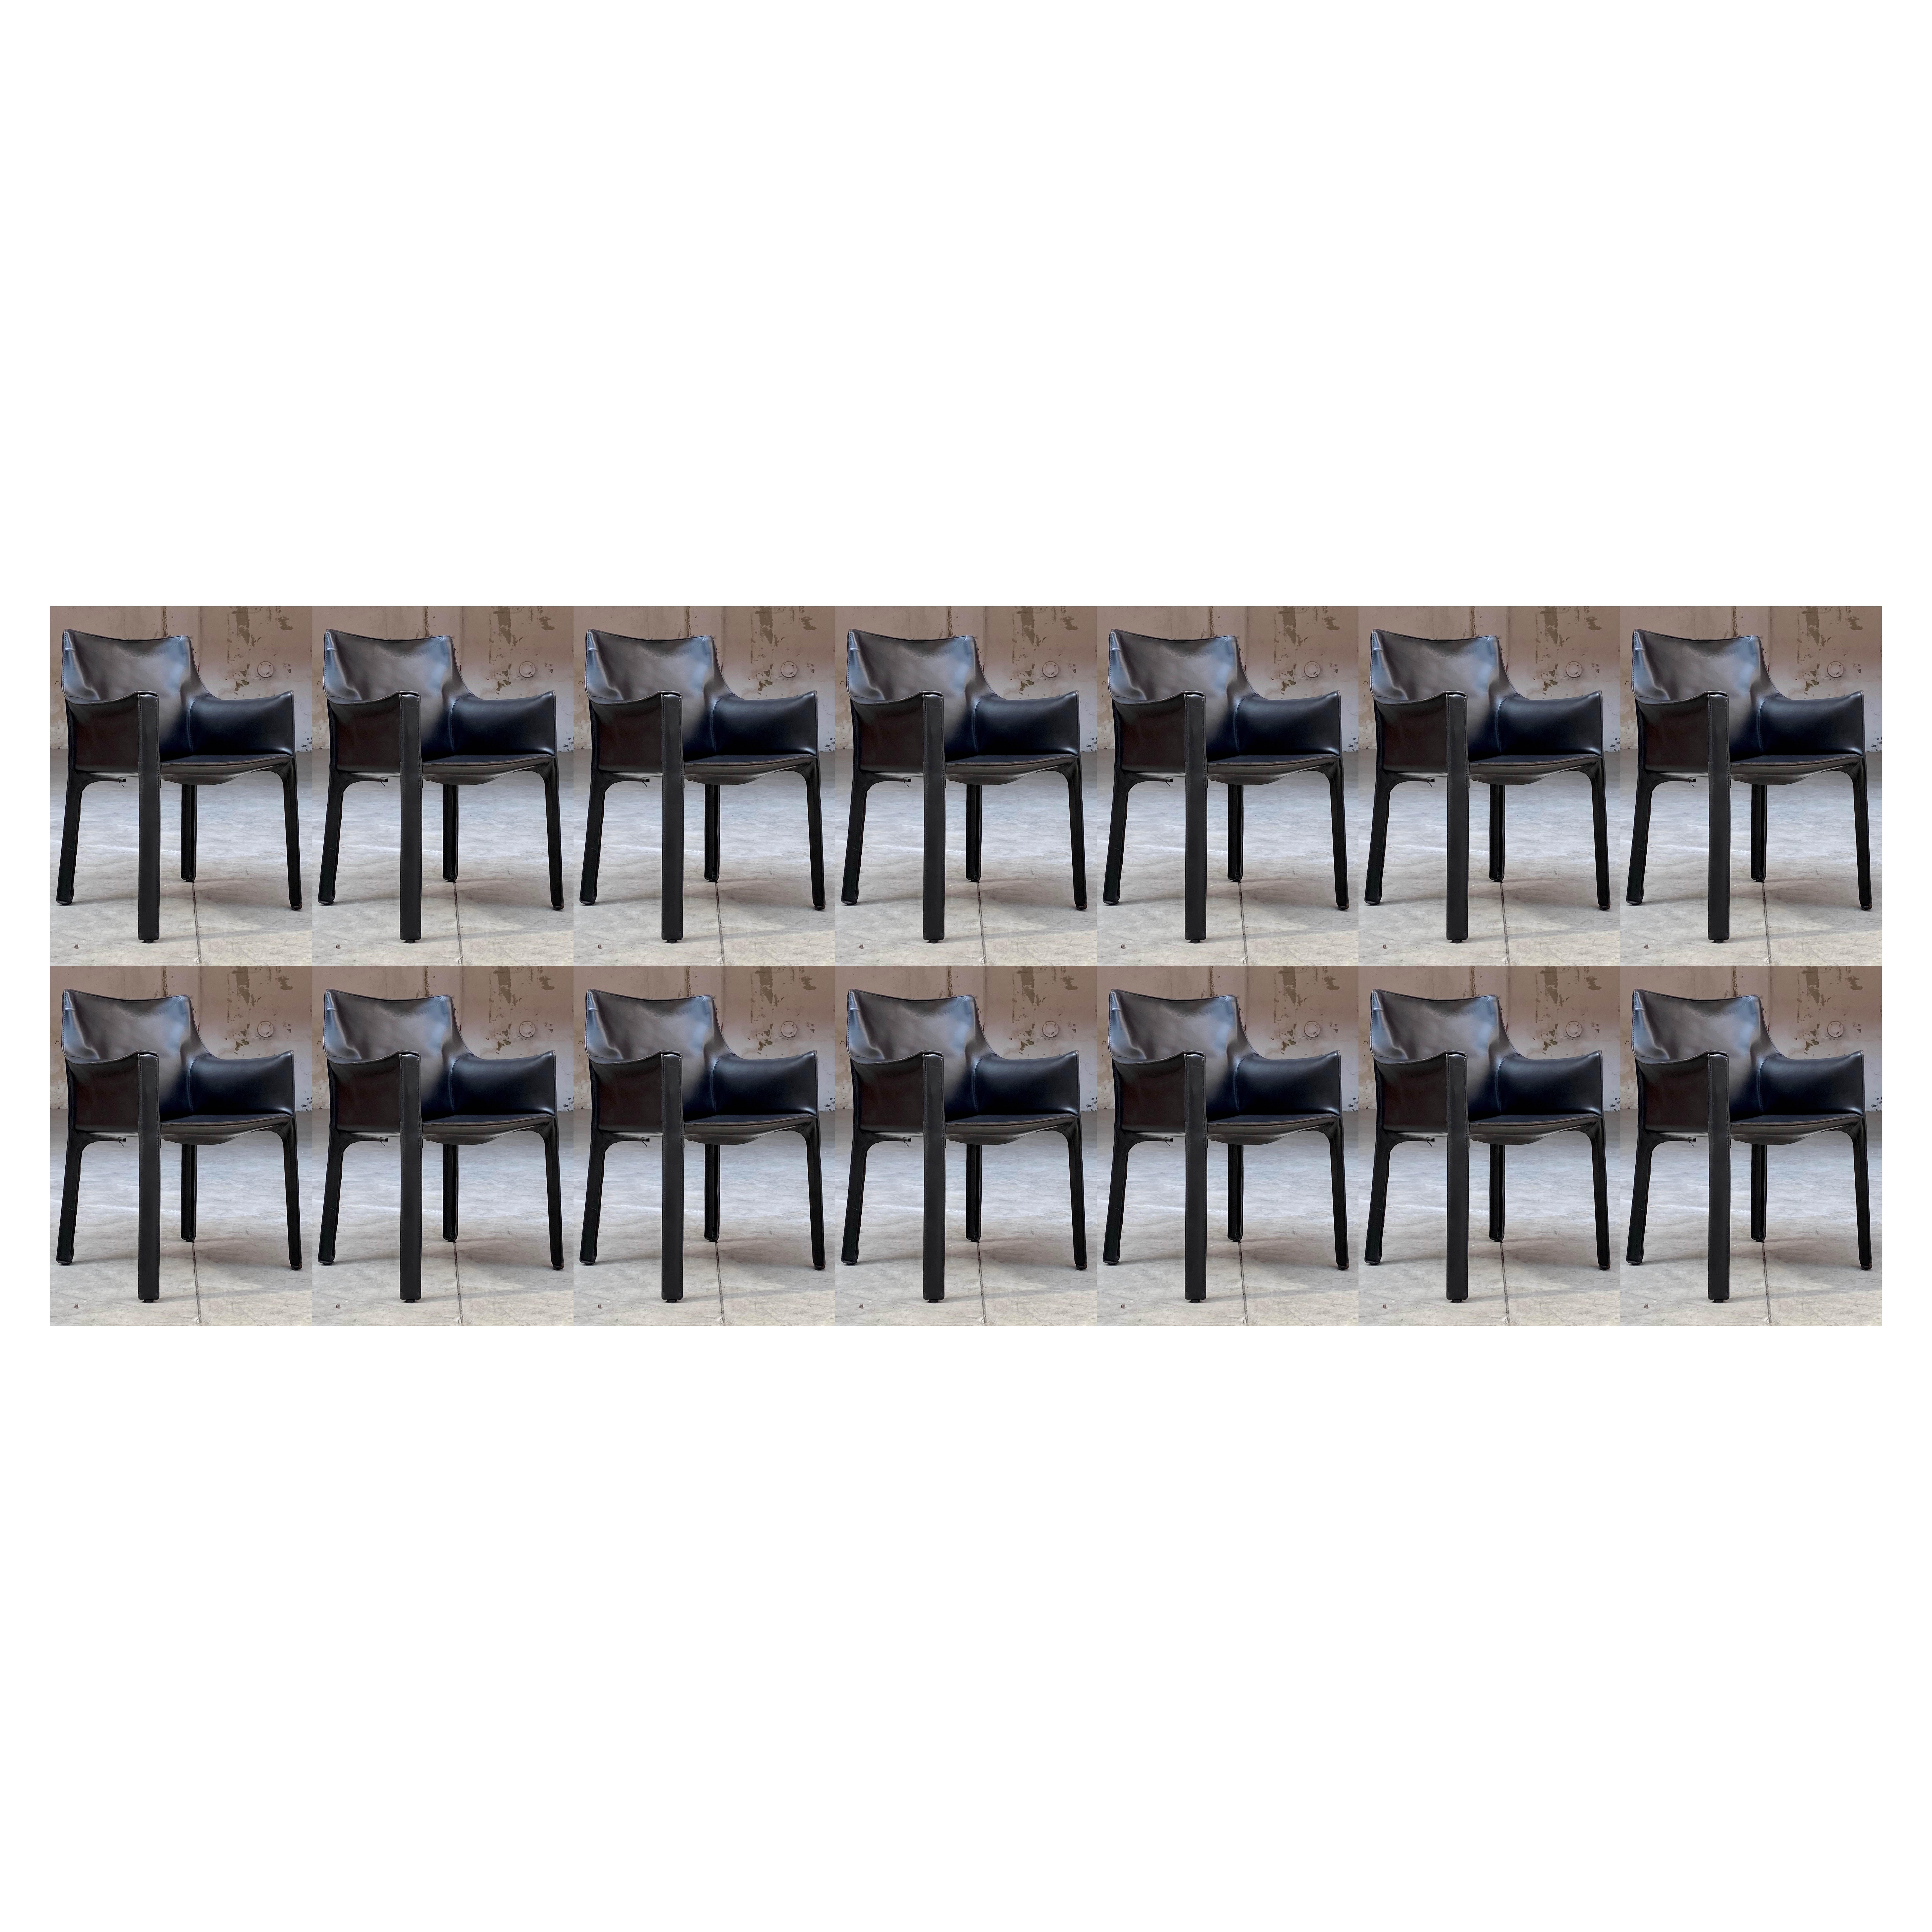 Mario Bellini "CAB 413" Chairs for Cassina in black, 1977, Set of 14 For Sale